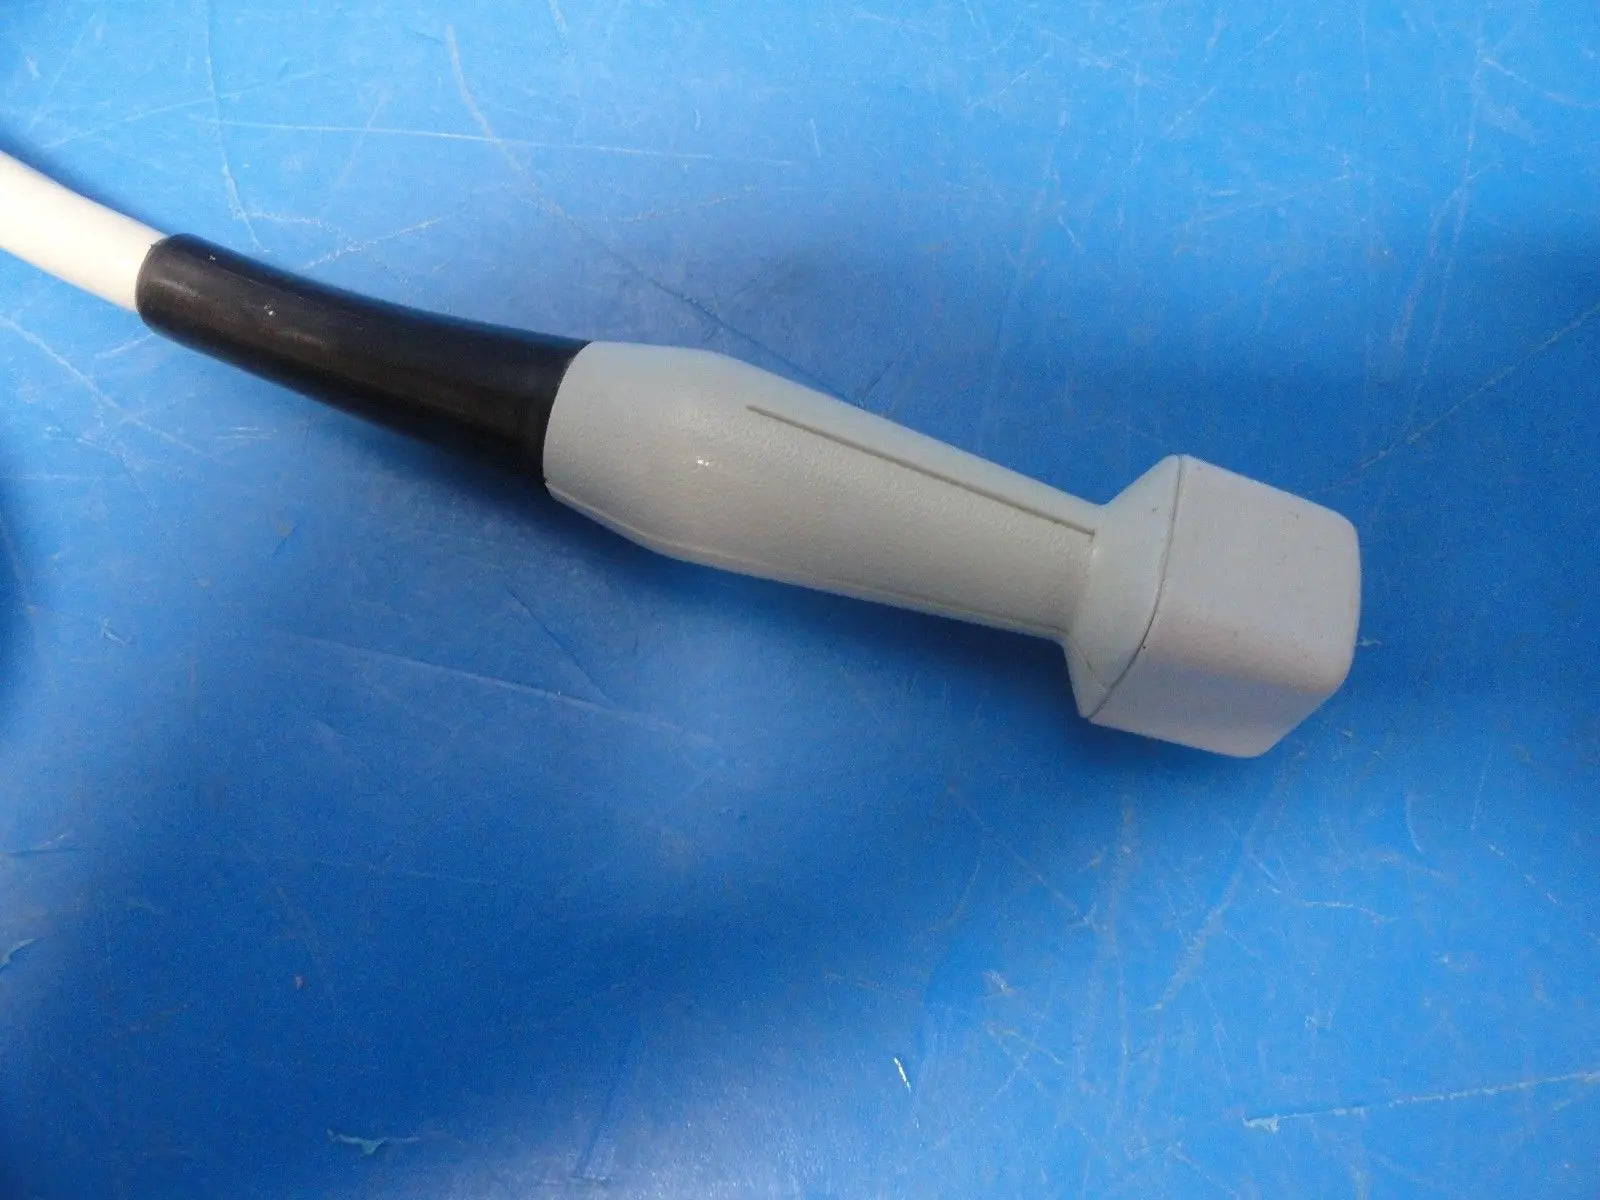 GE 2.5/48S P/N 45-231613G1 Sector Ultrasound Transducer Probe (8693) DIAGNOSTIC ULTRASOUND MACHINES FOR SALE